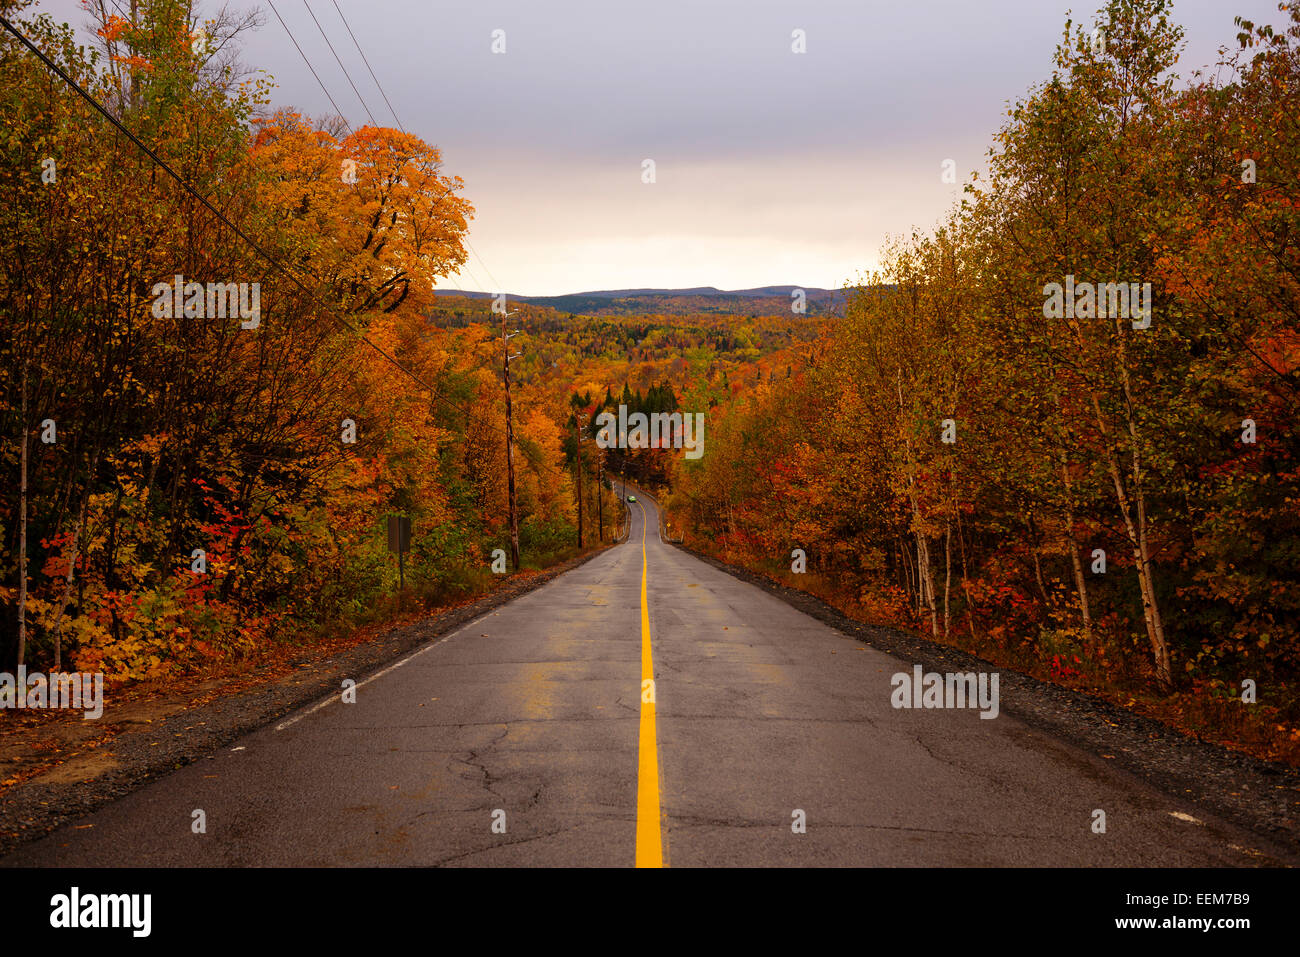 Canada, Quebec, Symmetrical view of road with single yellow line and autumn trees on sides Stock Photo